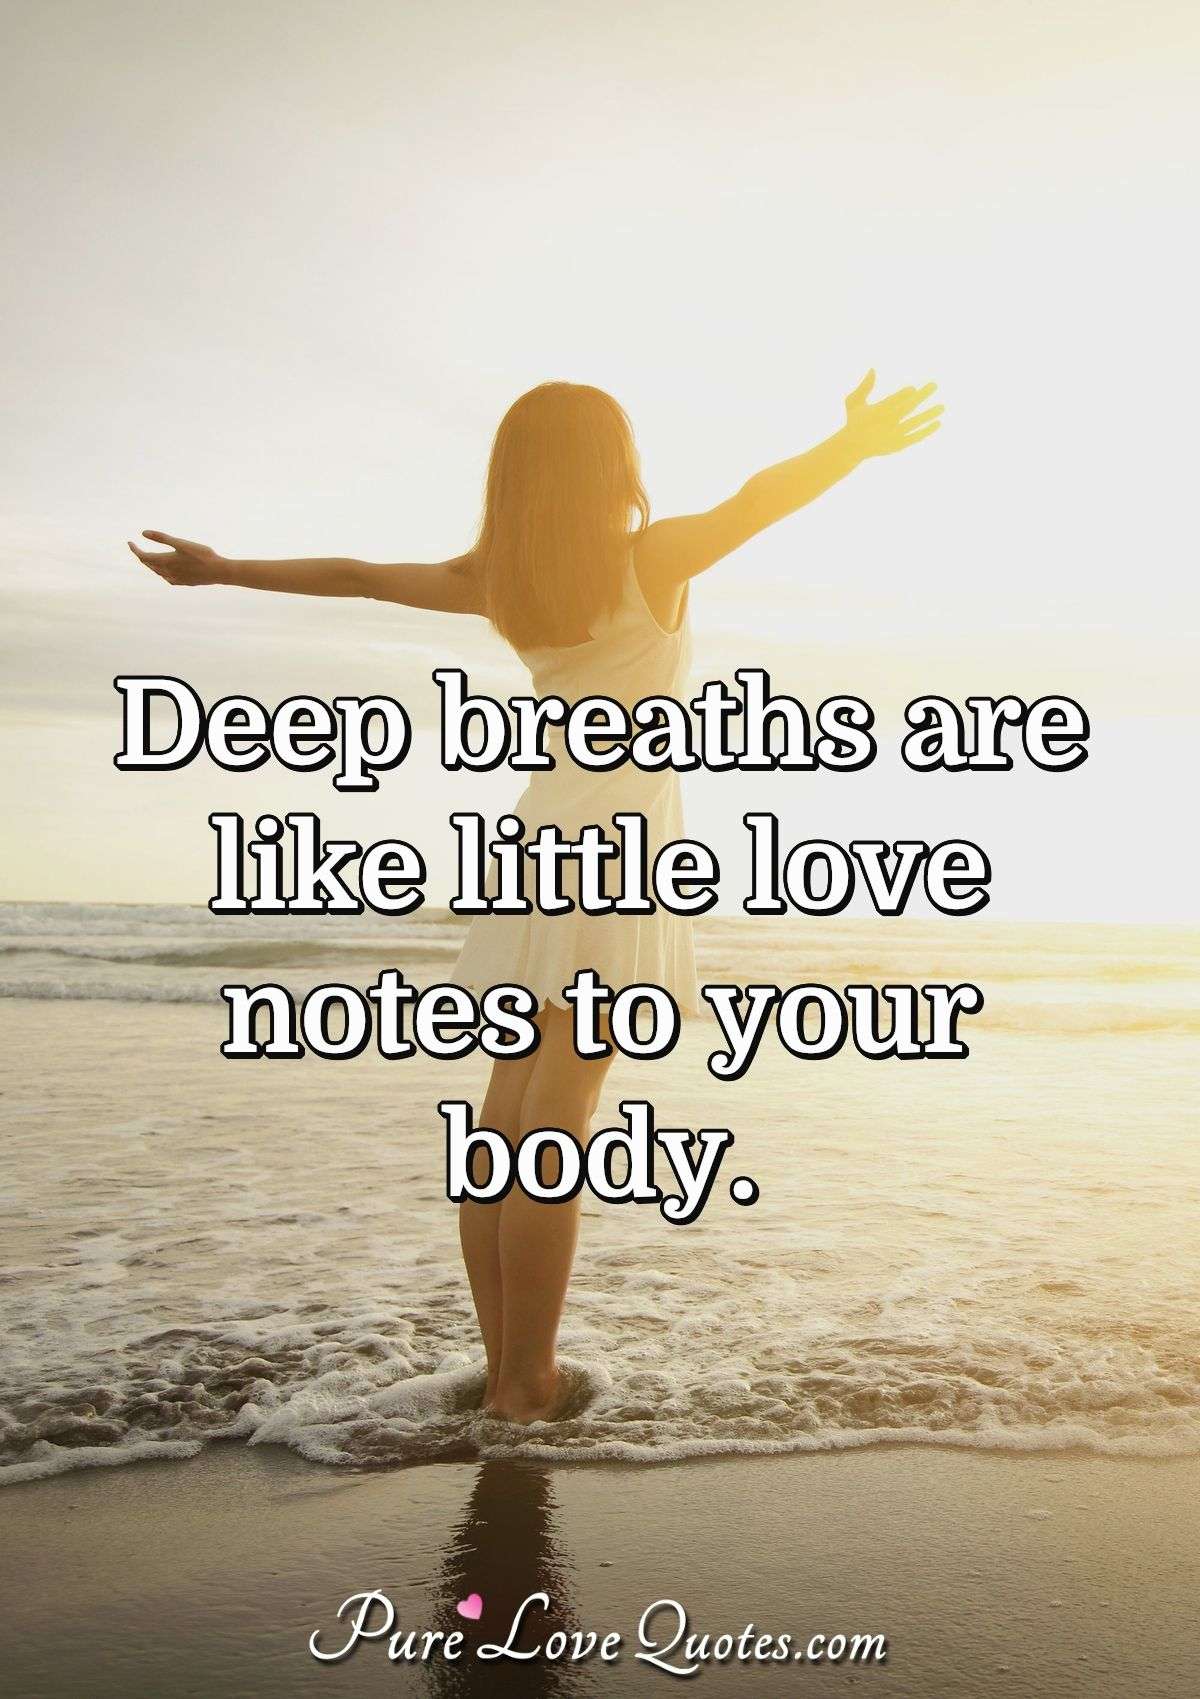 Deep breaths are like little love notes to your body. - Anonymous